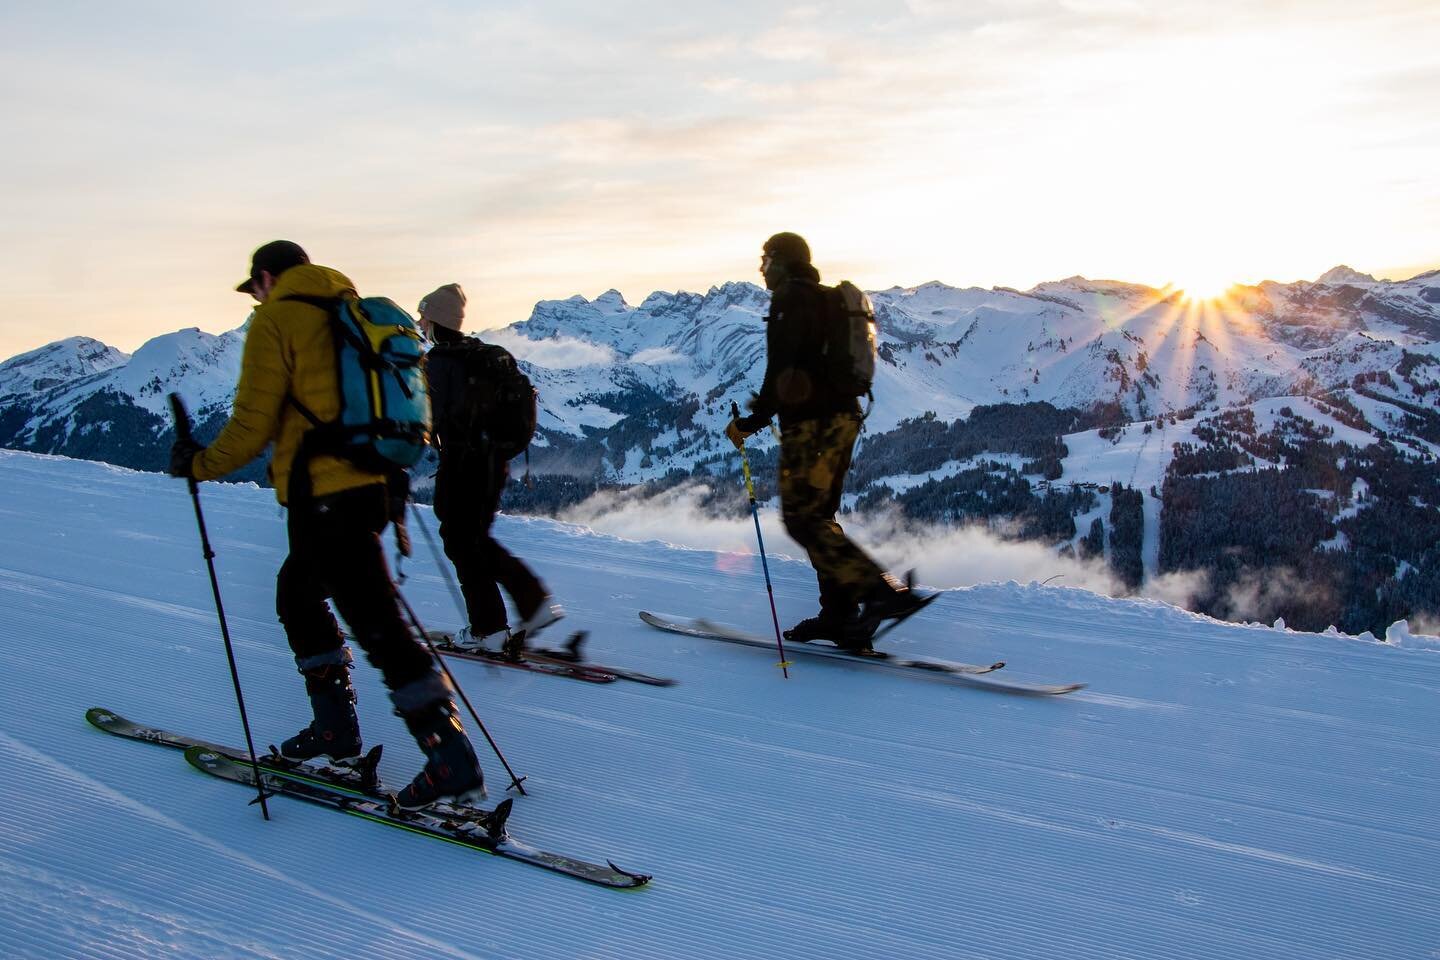 Did you know that we also rent out ski touring equipment so you can try it for yourself? If you want to go exploring, get a good workout or even catch the sunrise from the summit ski touring could be for you!